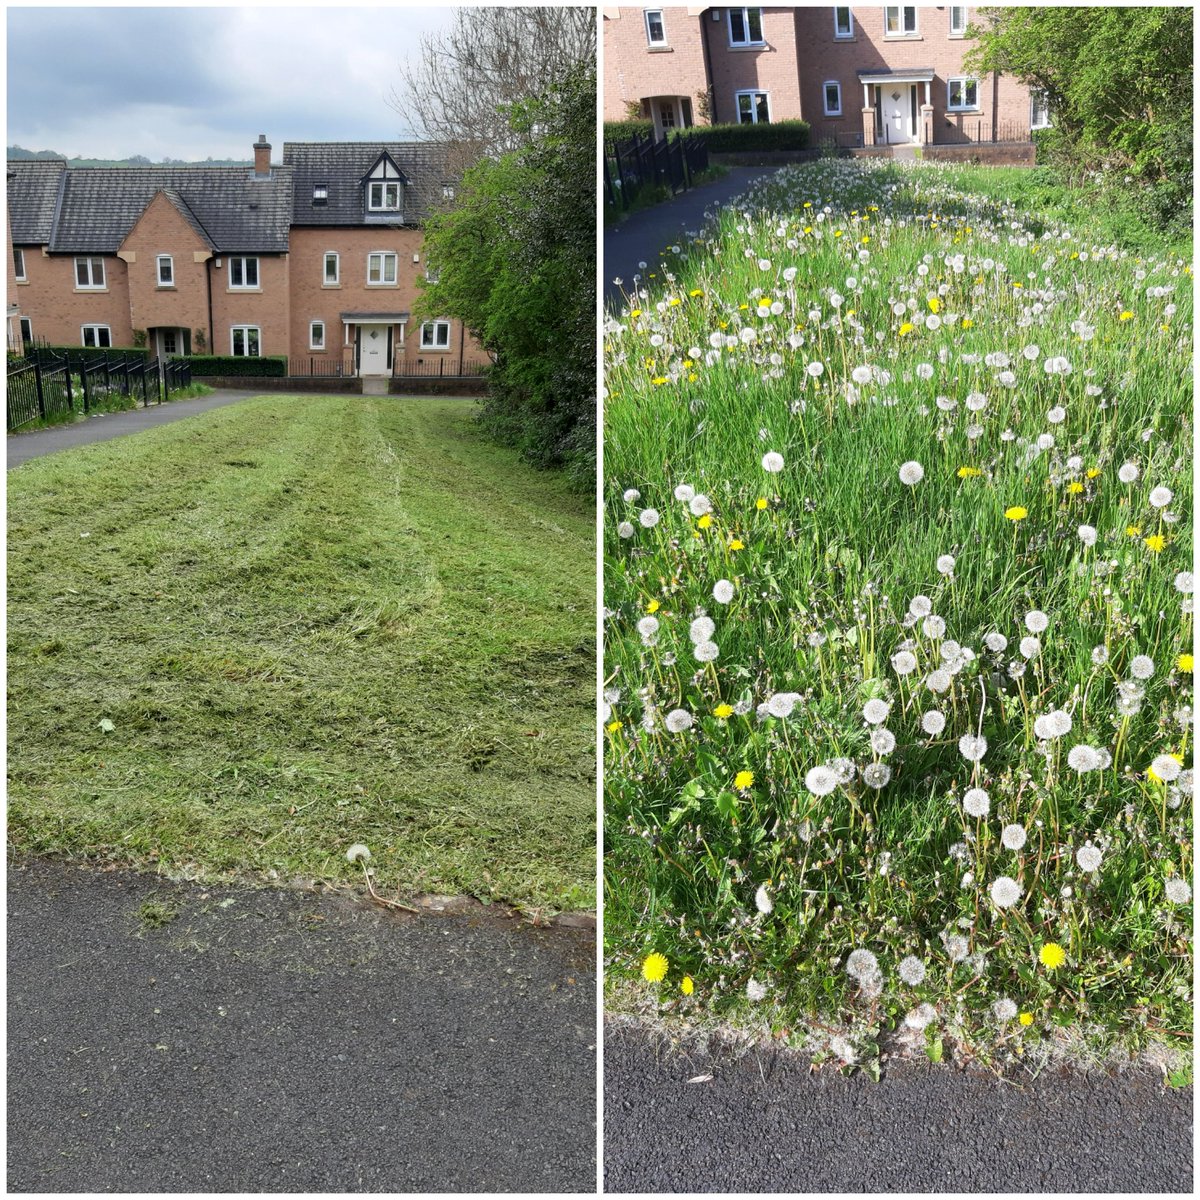 How naive of me to believe that @derbyshiredales would want to: Help nature Sequester carbon Reduce emissions Save tax payers' money. They came back and totally decimated all the wildflowers on multiple sites. #Morledge #Matlock Utterly shameful and during #NoMowMay